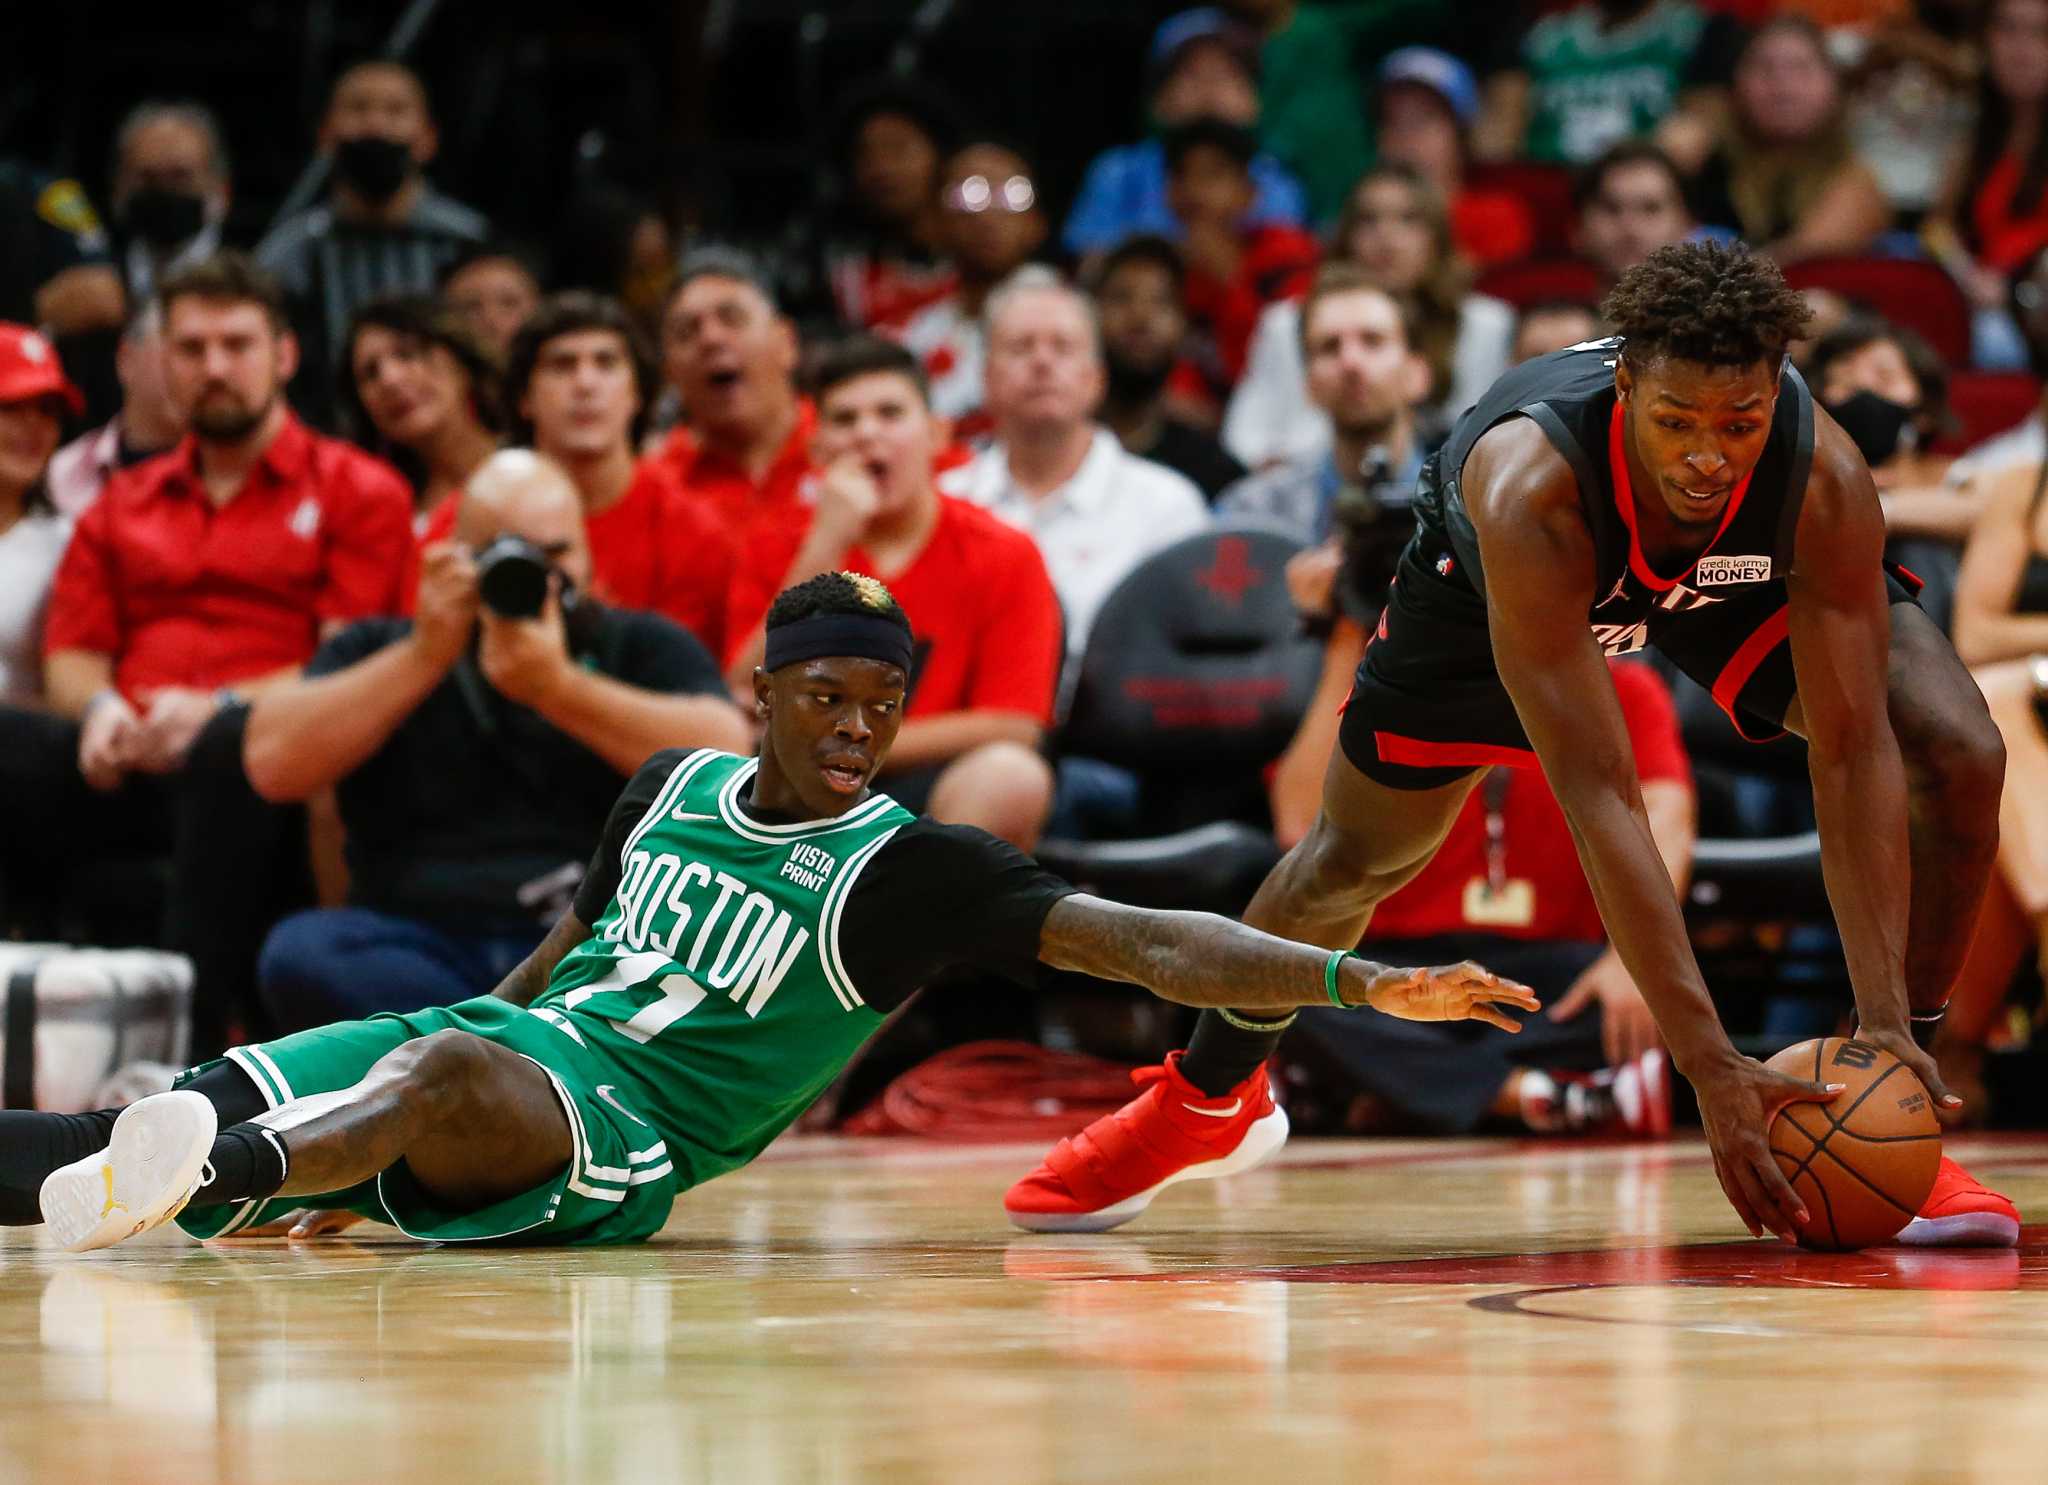 How Does Dennis Schroder Fit With The Boston Celtics?